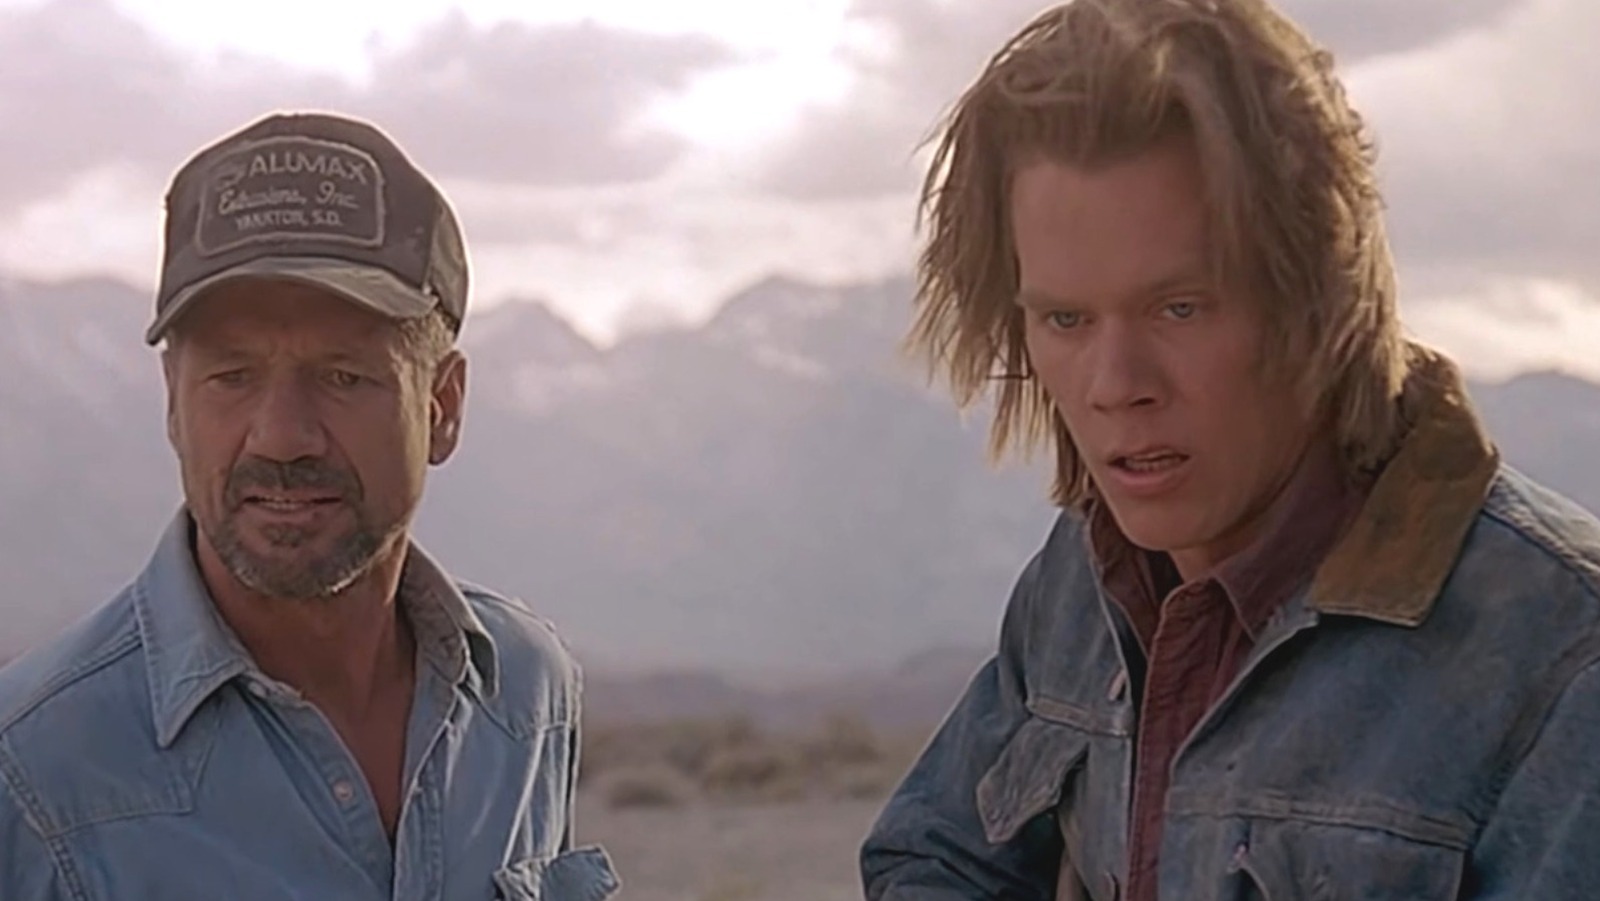 Tremors Planned For One VFX Scene The Crew Just Couldn't Pull Off, Digital Rumble, digitalrumble.com